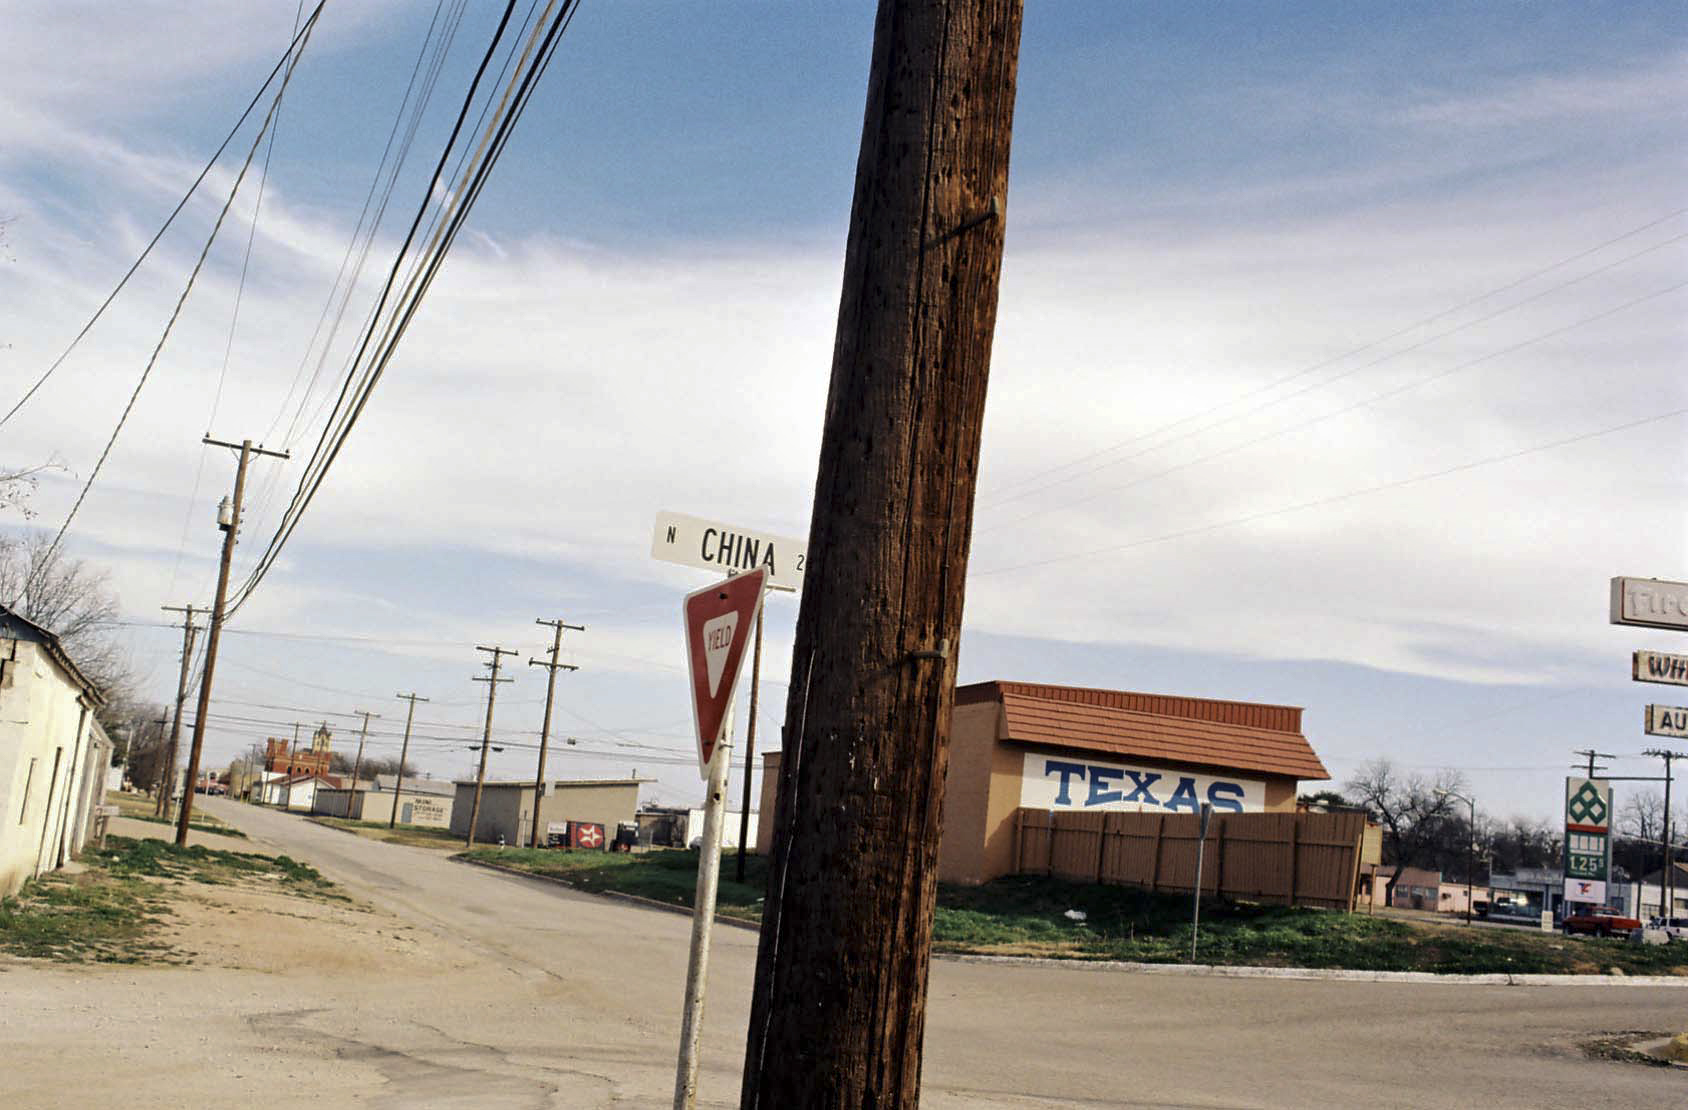 Color photograph of an ex-urban landscape showing an intersection with several low buildings and a row of telephone poles. The nearest building bears a sign with the word "Texas" in blue capital letters; just behind the centermost telephone pole is a street sign reading "China."